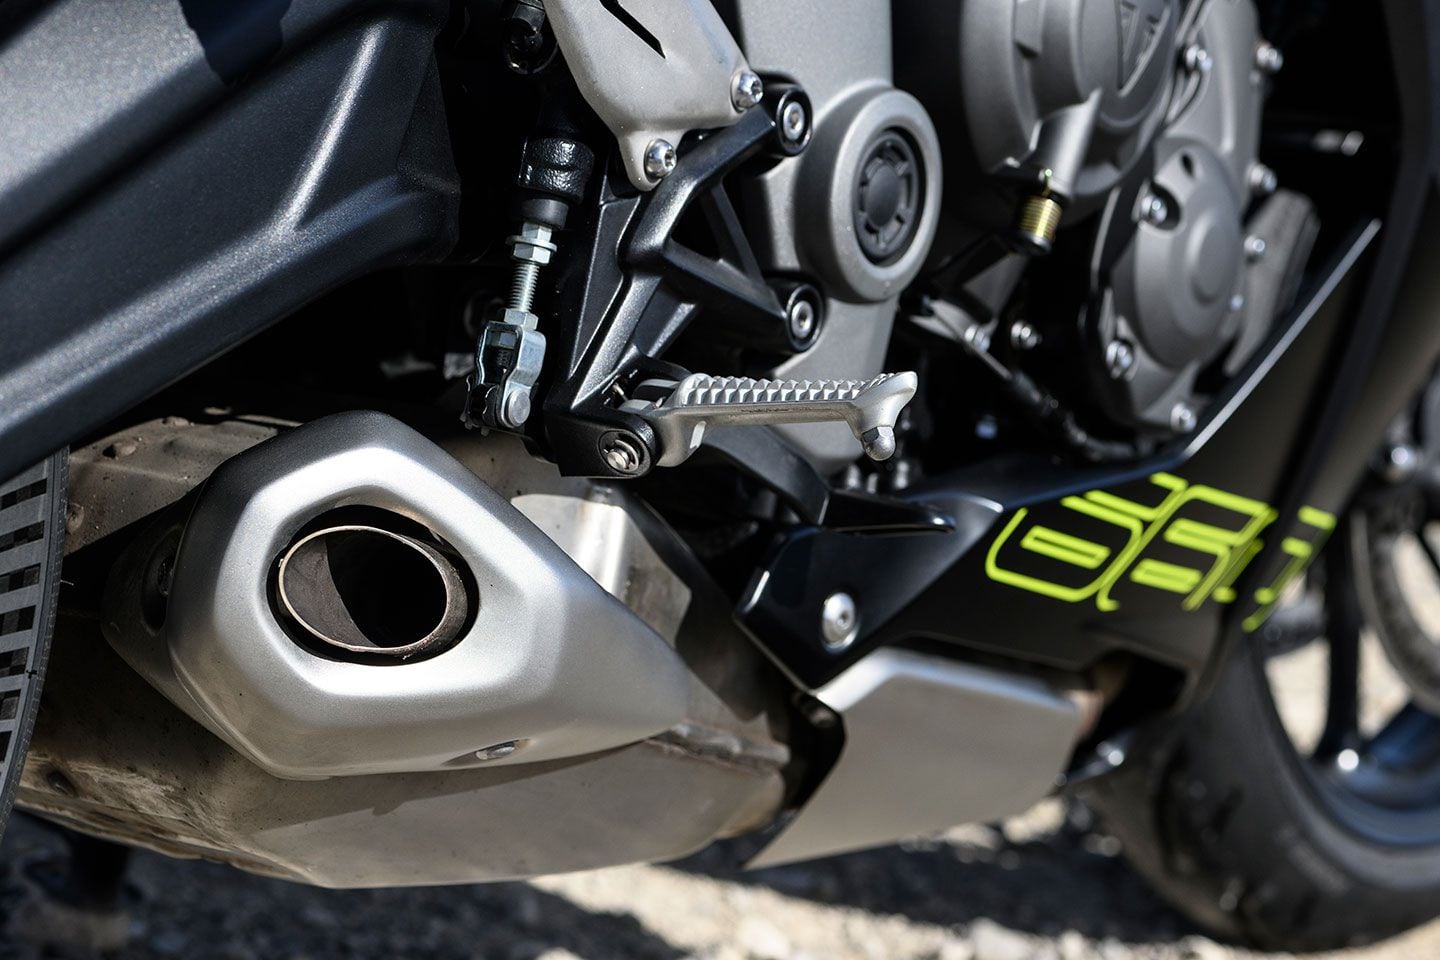 An updated exhaust has been altered for the best possible sound and flow.